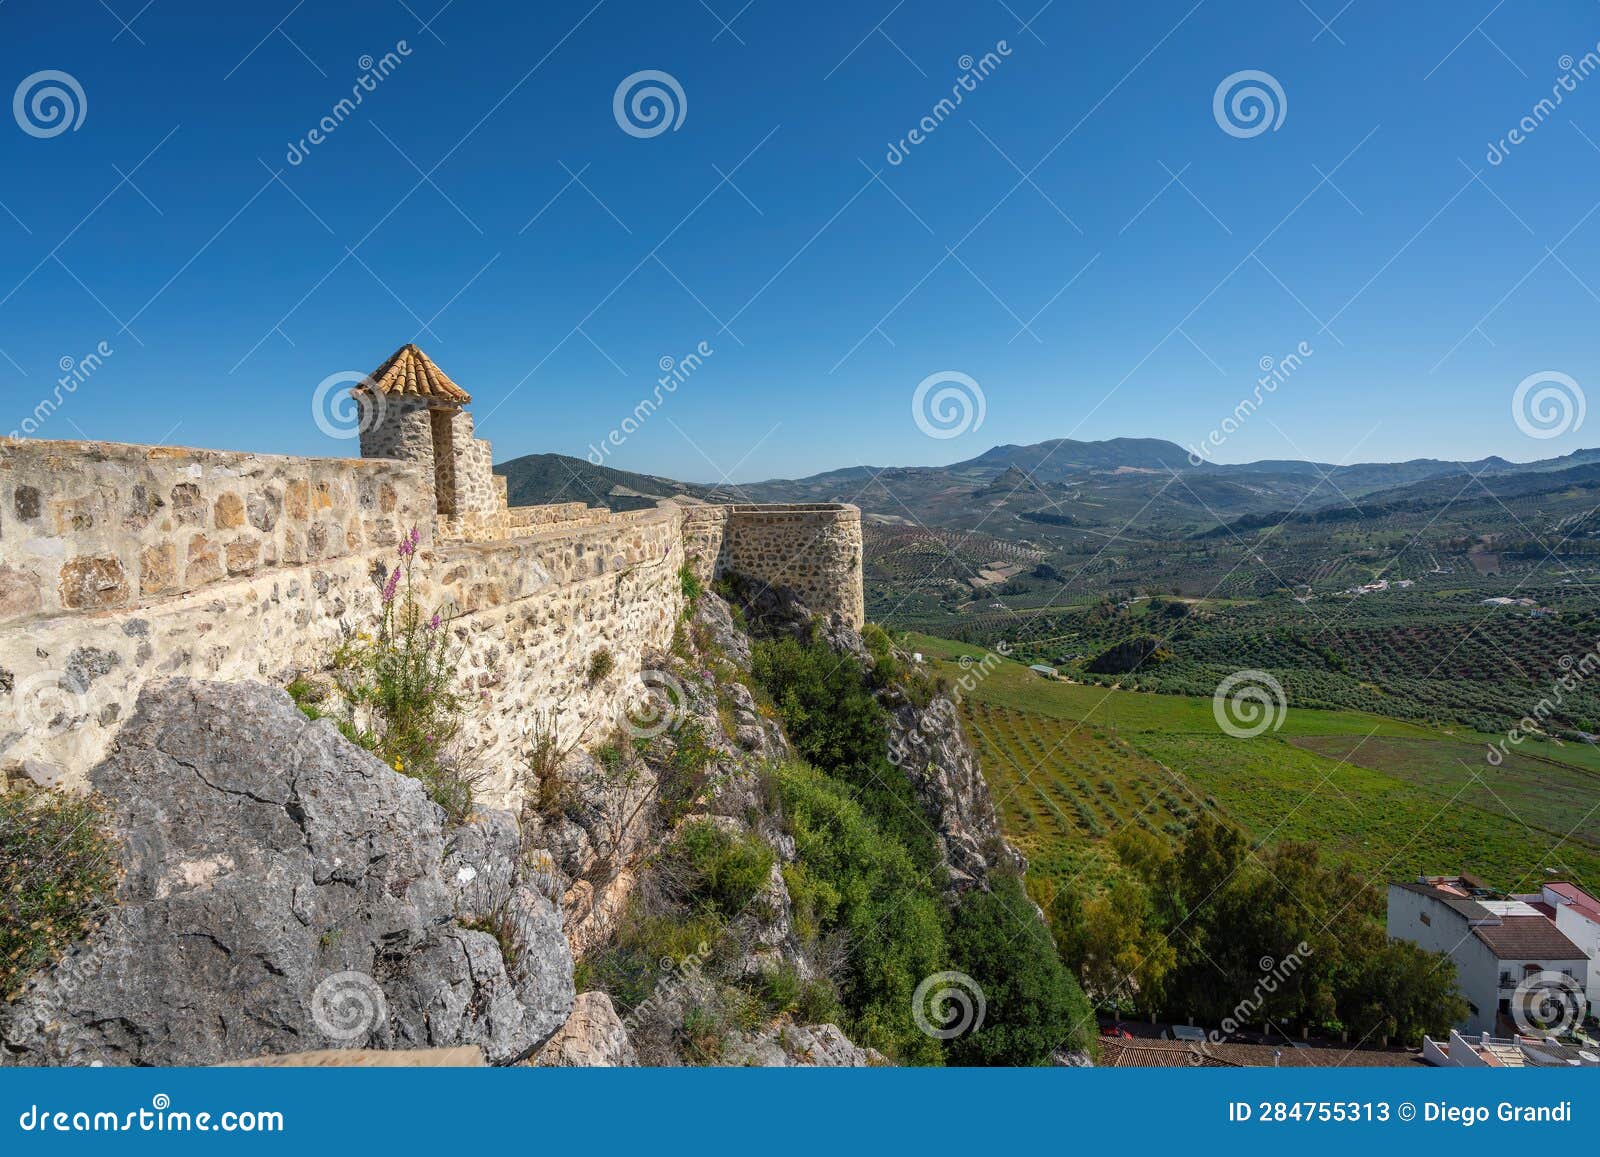 walls of olvera castle and sierra del tablon mountains view - olvera, andalusia, spain